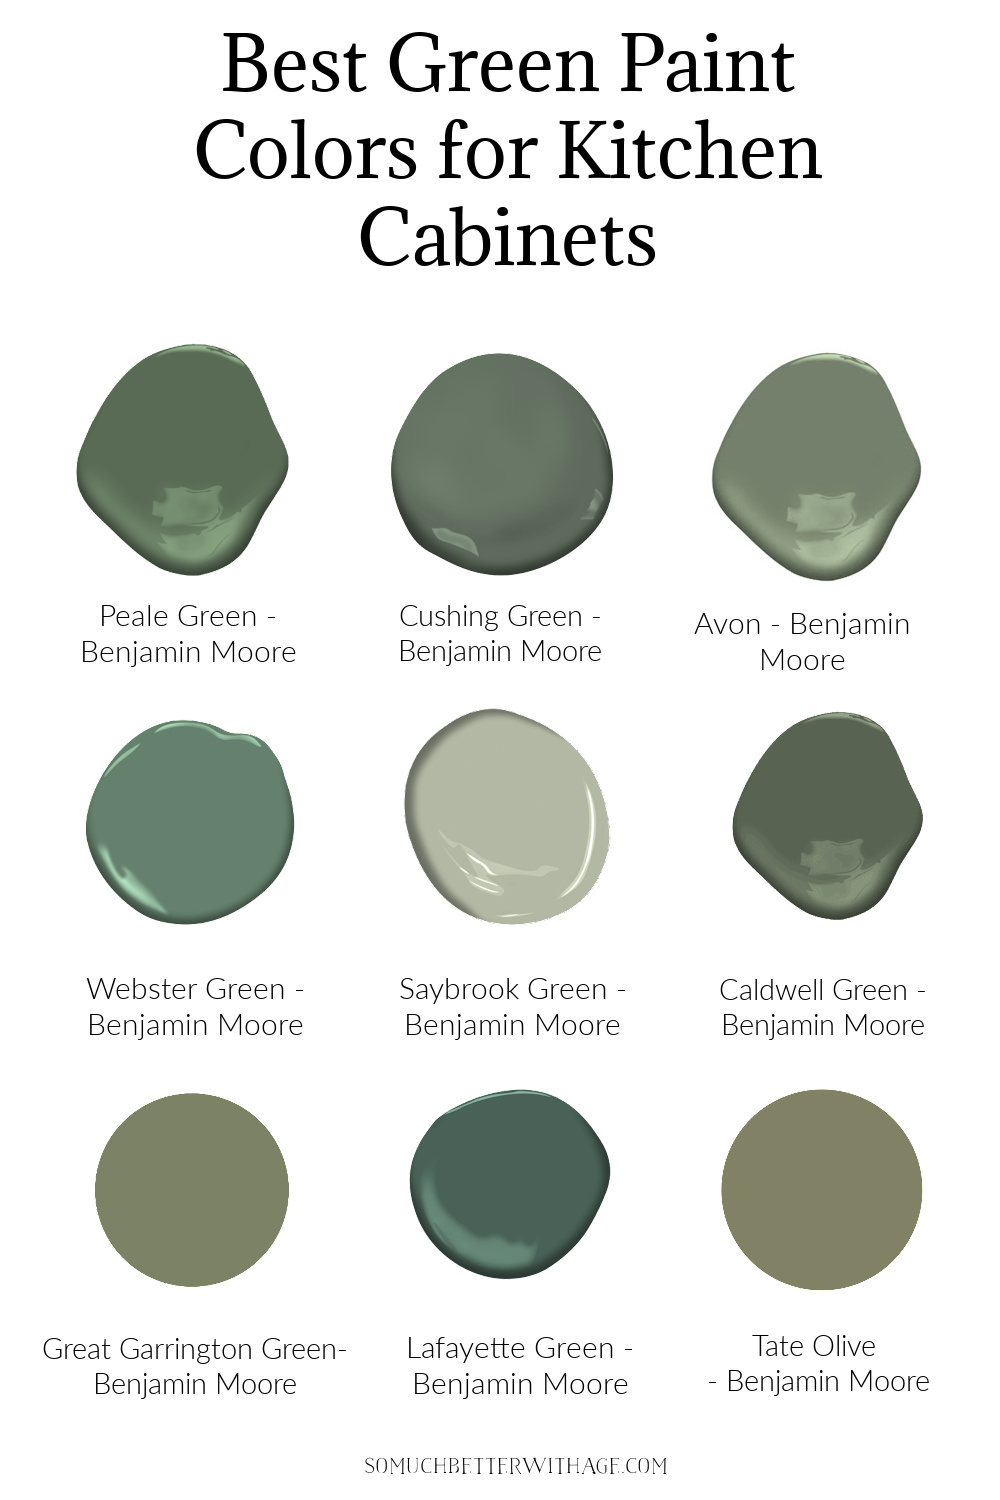 Best Green Paint Colors for Kitchen Cabinets